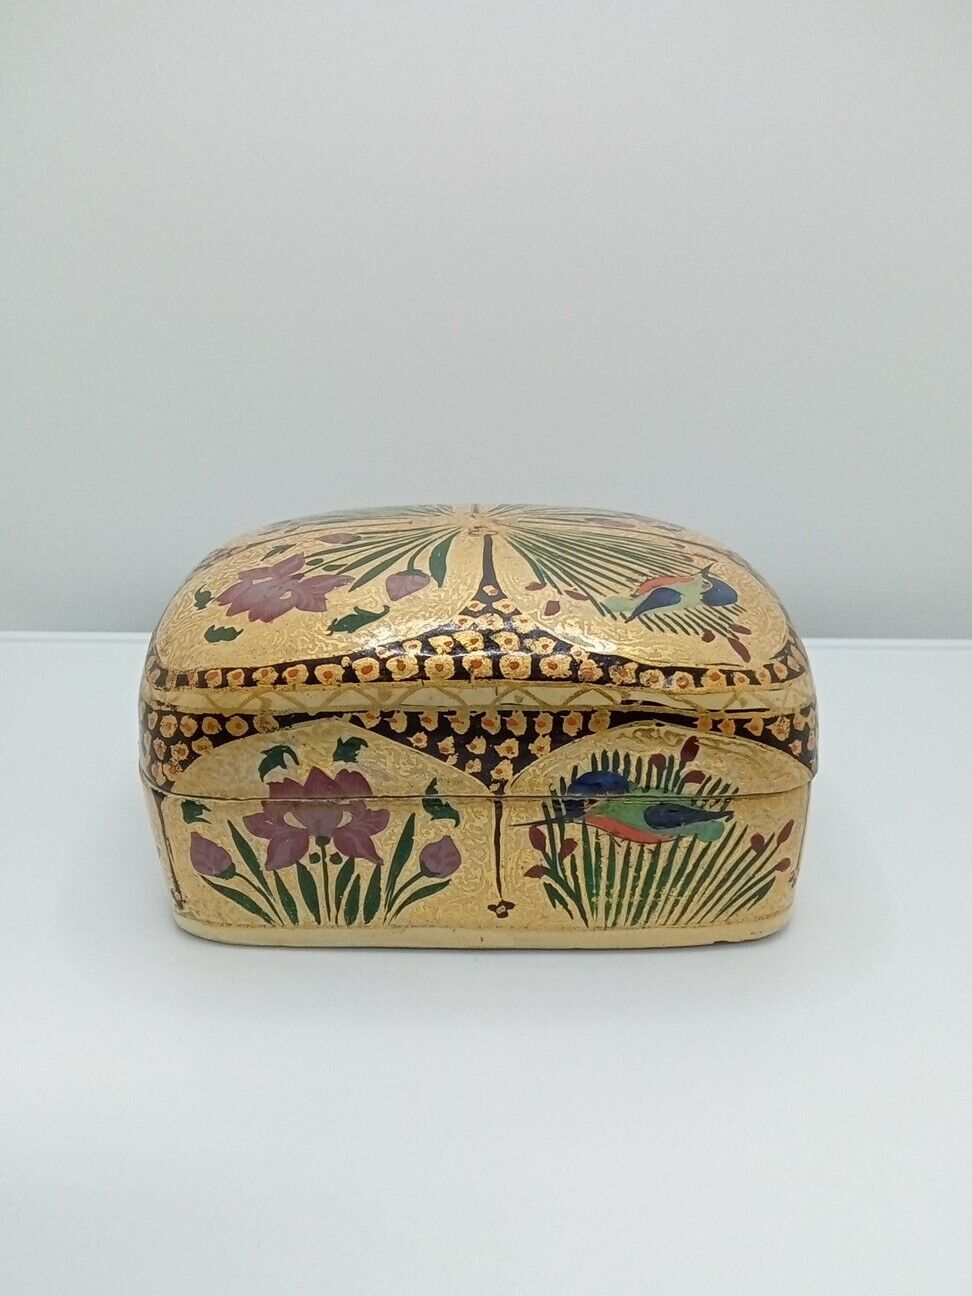 Vintage Kashmir India Hand Painted Lacquered Paper Mache Lidded Trinket Box